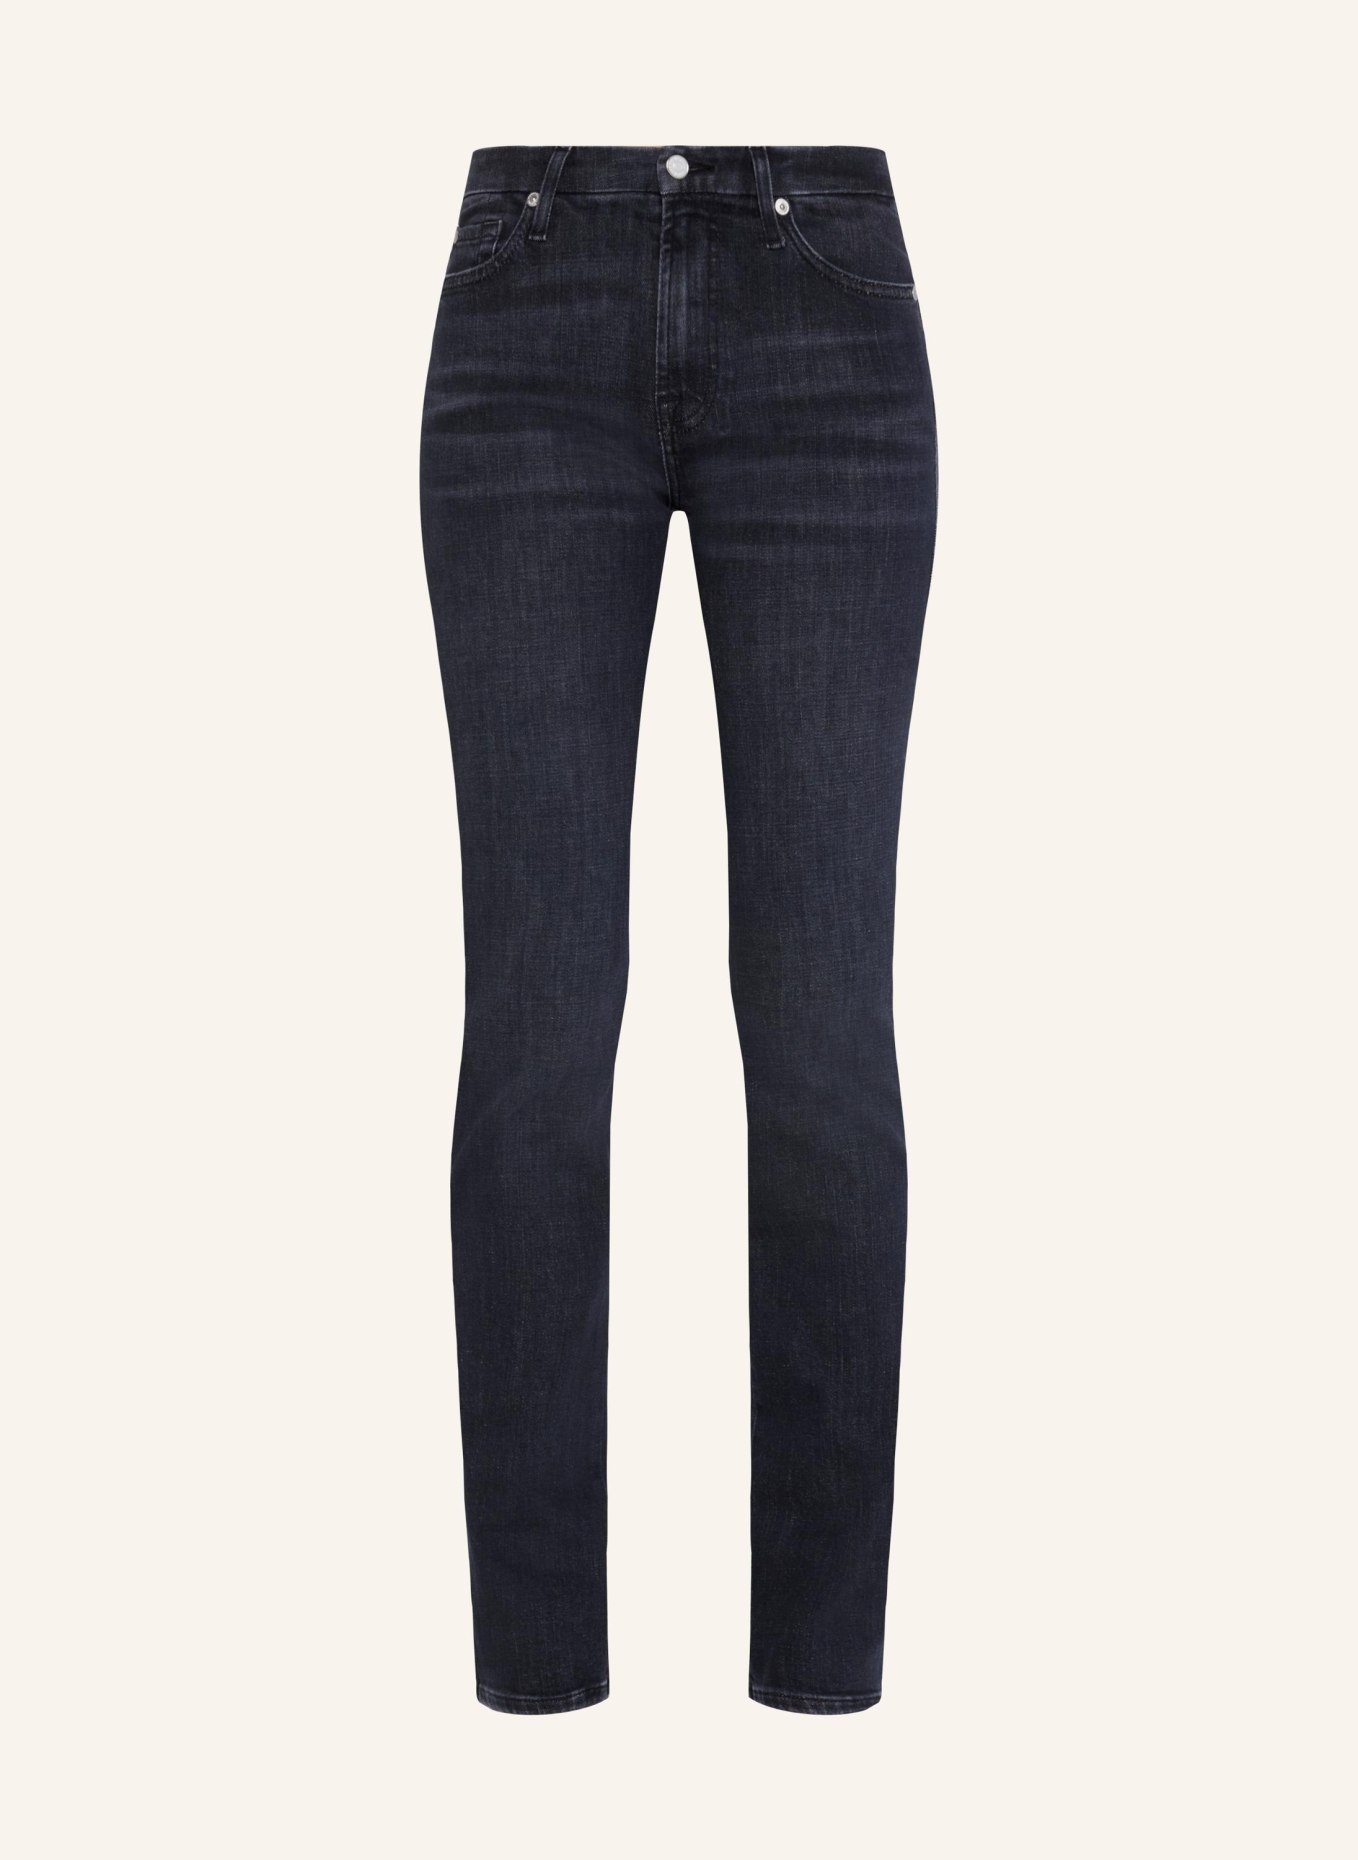 7 for all mankind Jeans KIMMIE STRAIGHT Straight fit, Farbe: SCHWARZ (Bild 1)